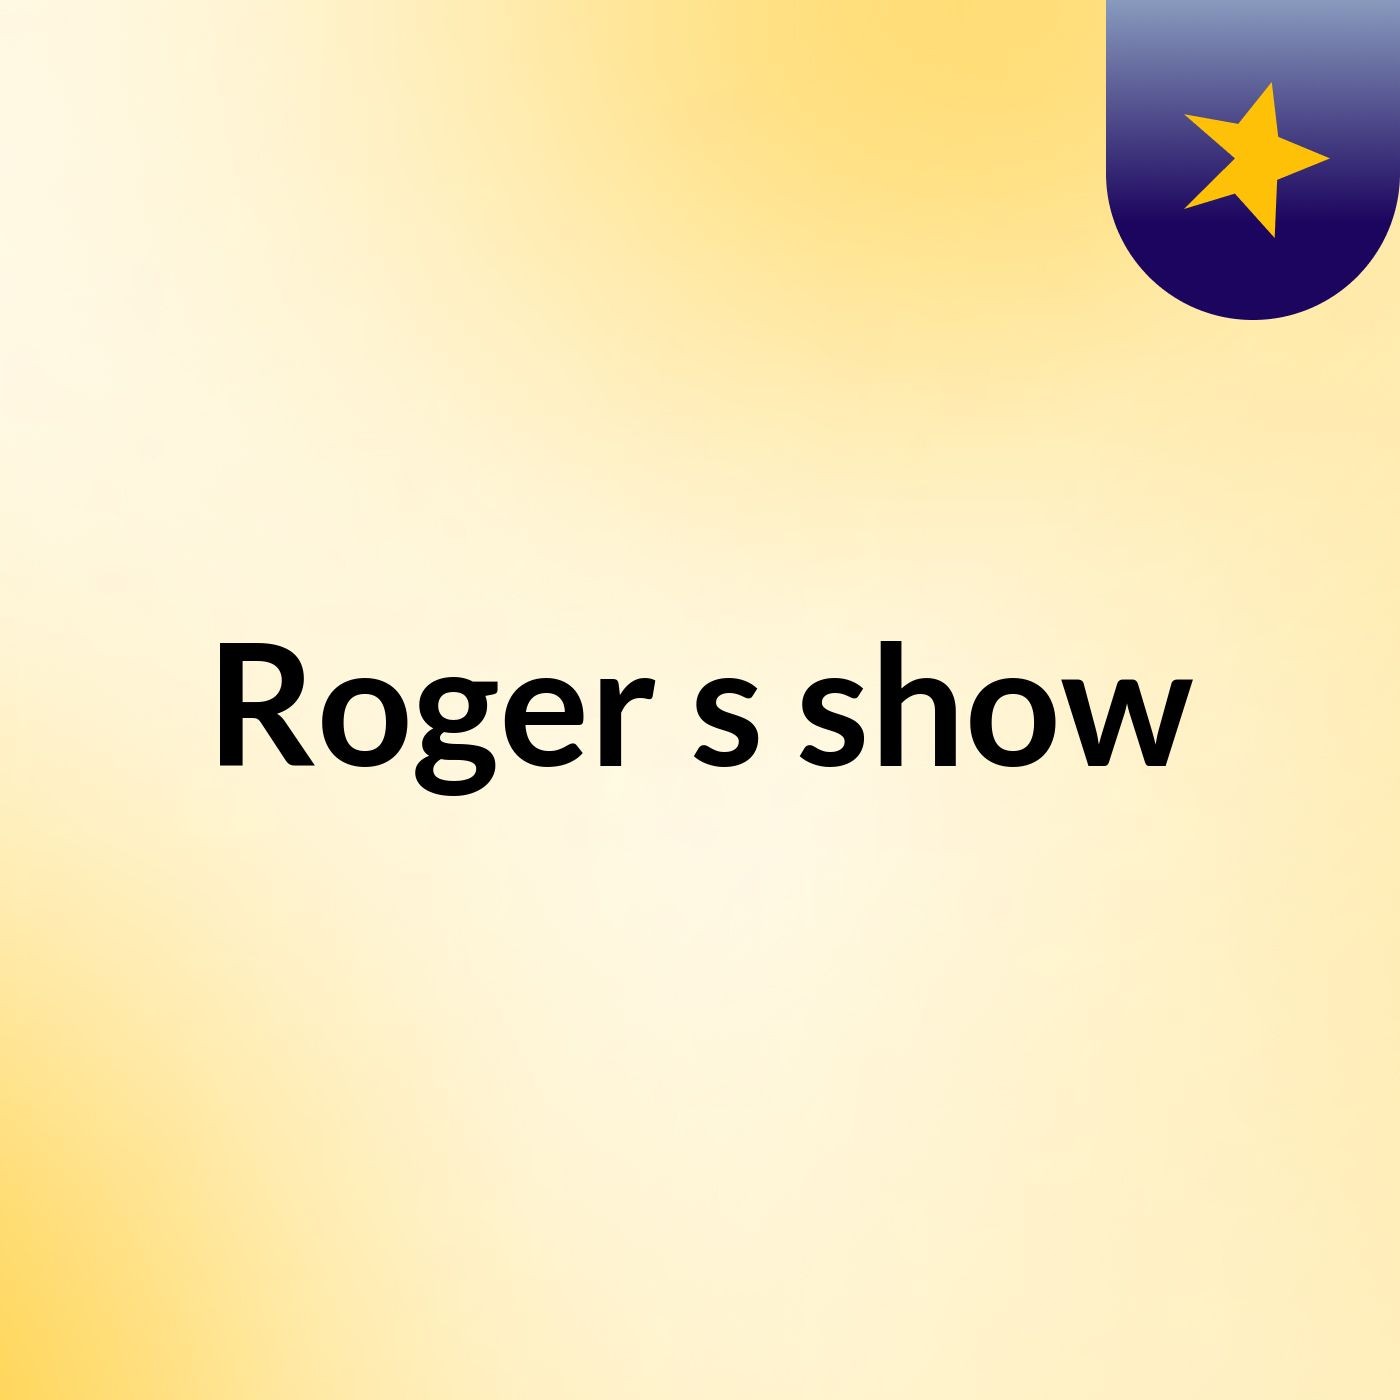 Roger's show